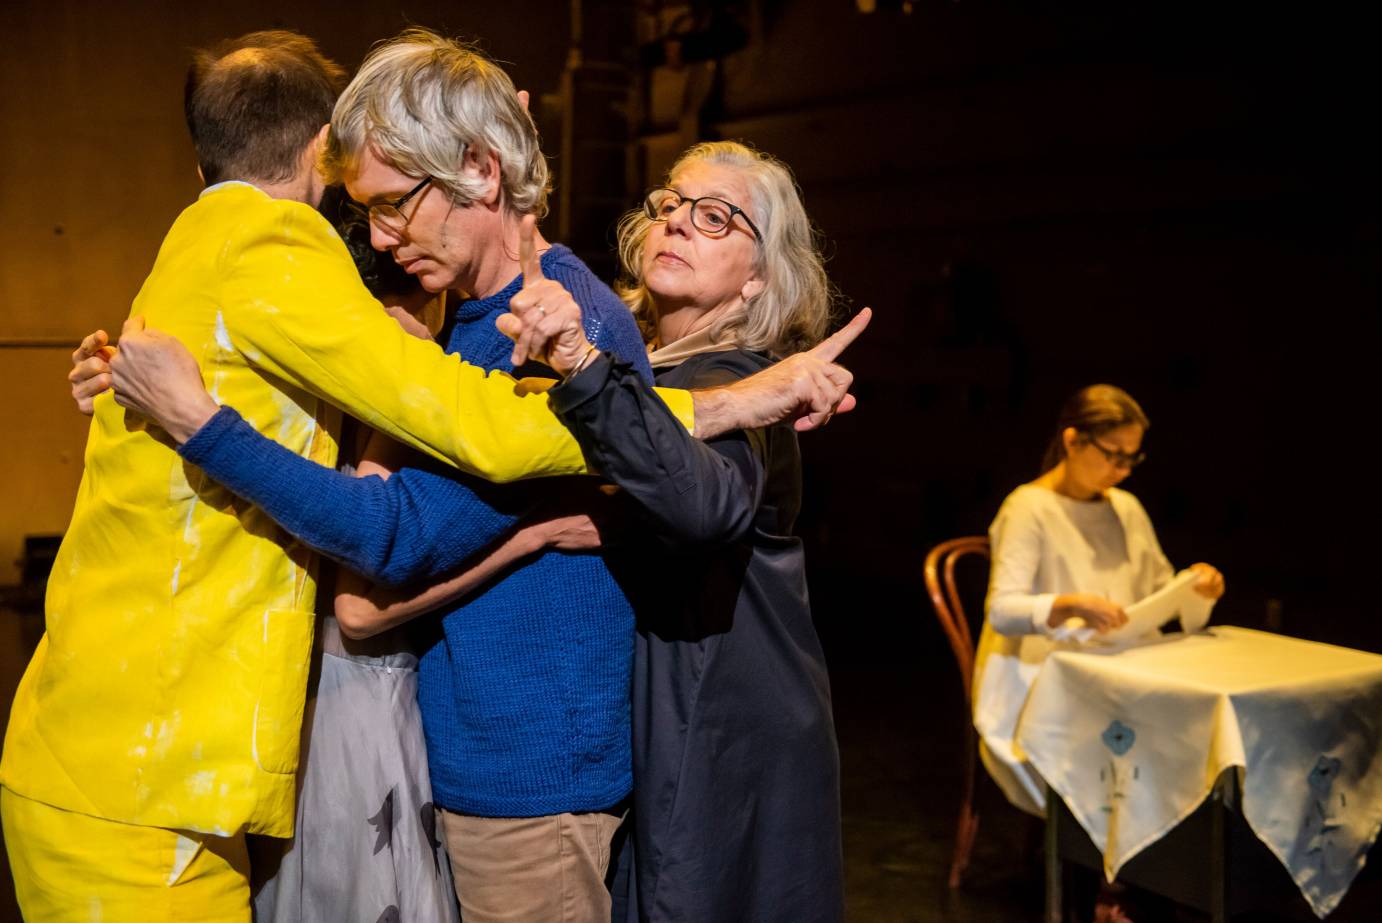 Four performers hug each other as another sits at a table folding a napkin